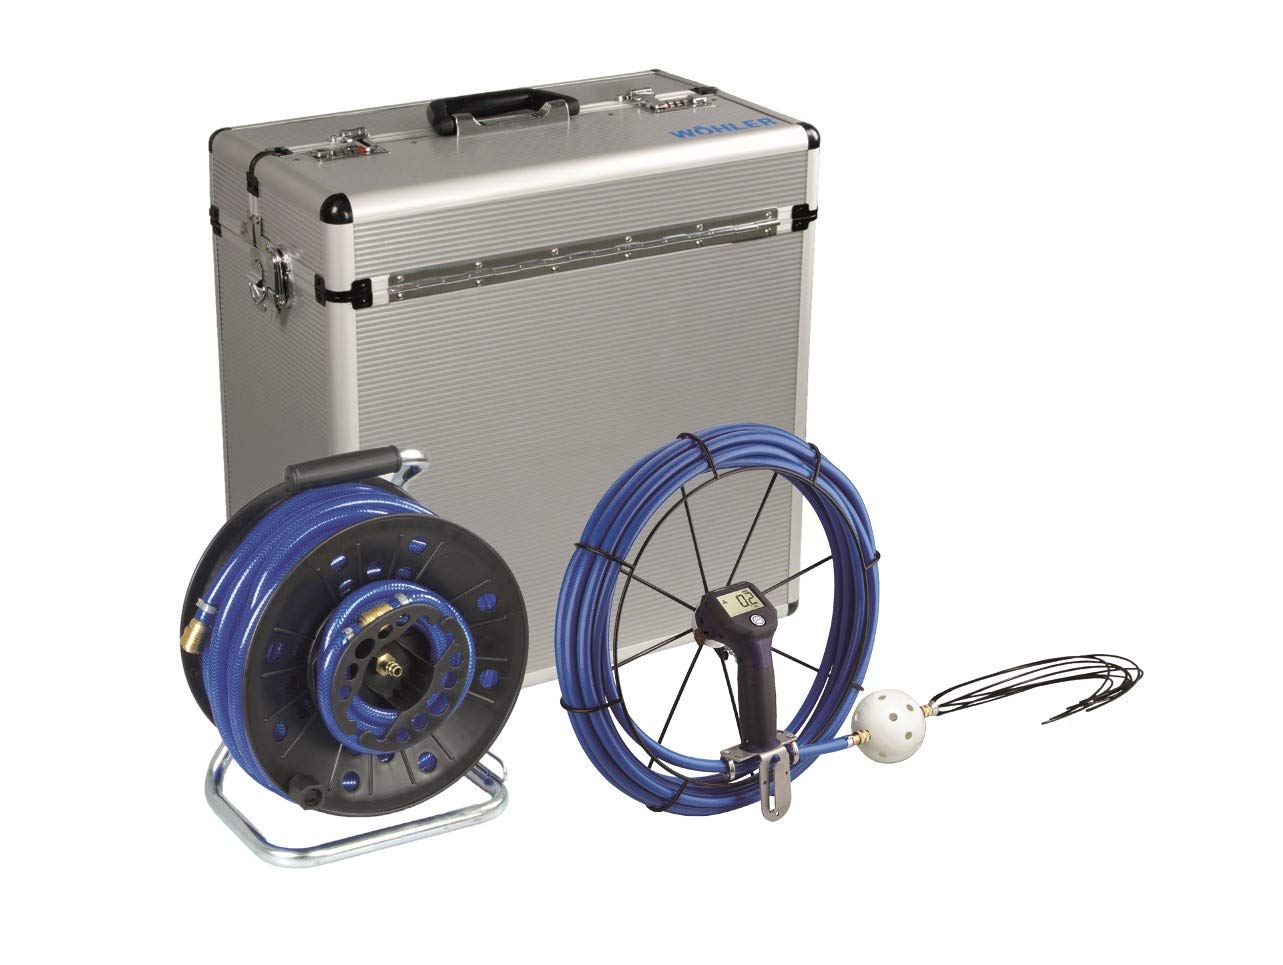 Wohler Compressed Air Cleaning Professional Set for Residential & Commercial - $870